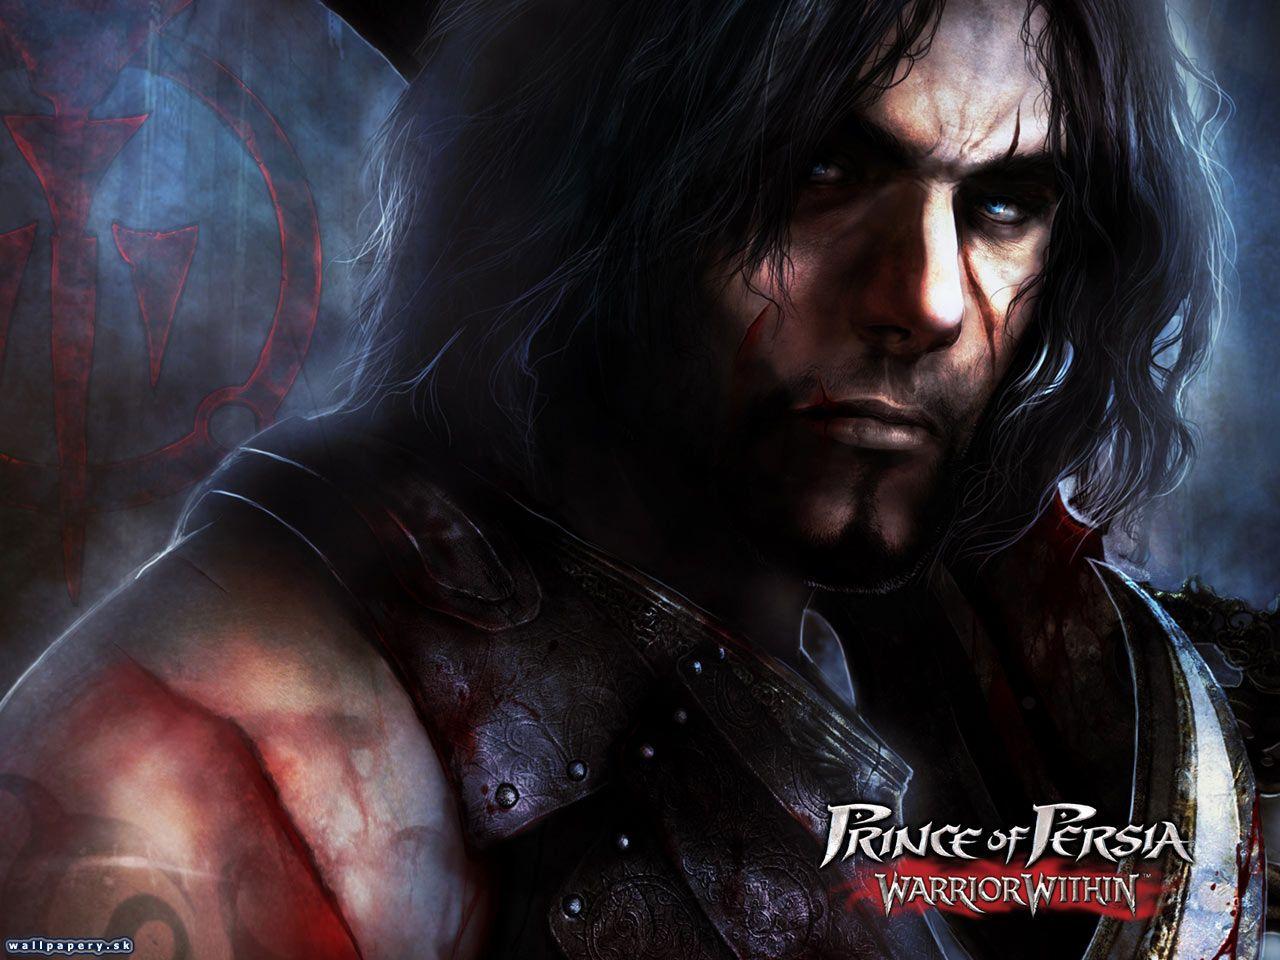 Wallpapers Hd For Desktop Prince Of Persia Warrior Within Images, Photos, Reviews